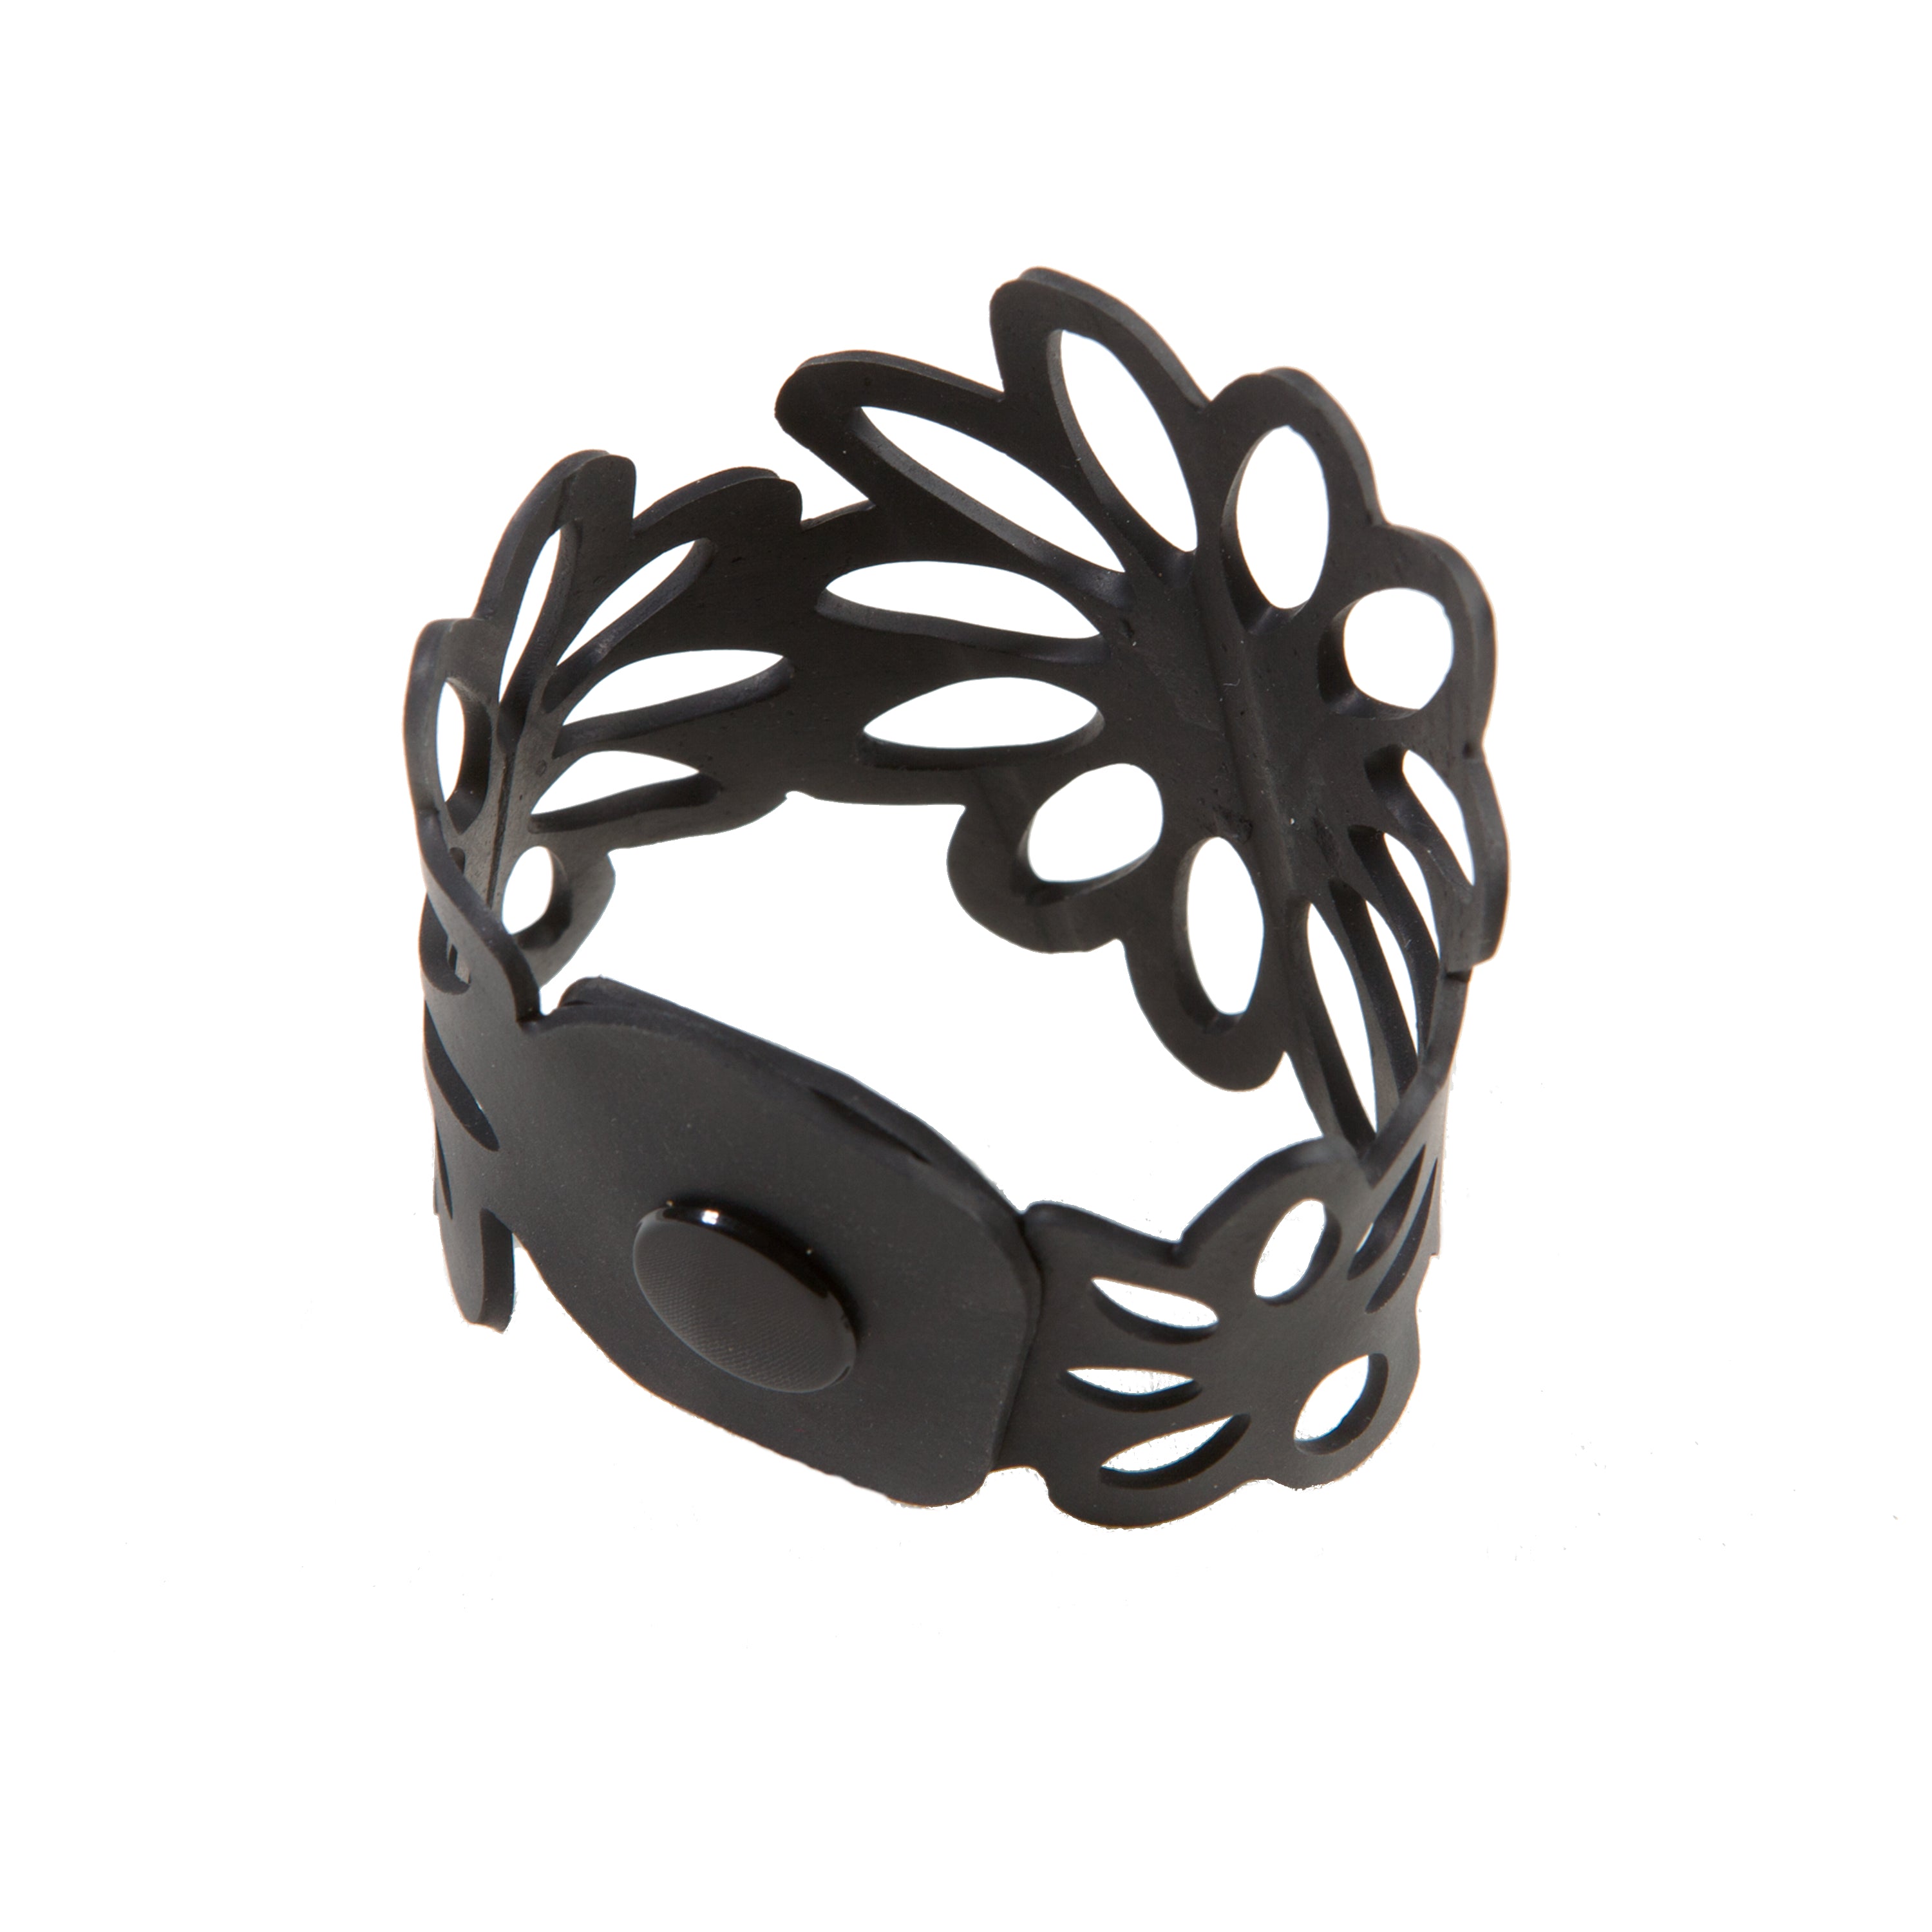 Dahlia Recycled Rubber Bracelet by Paguro Upcycle